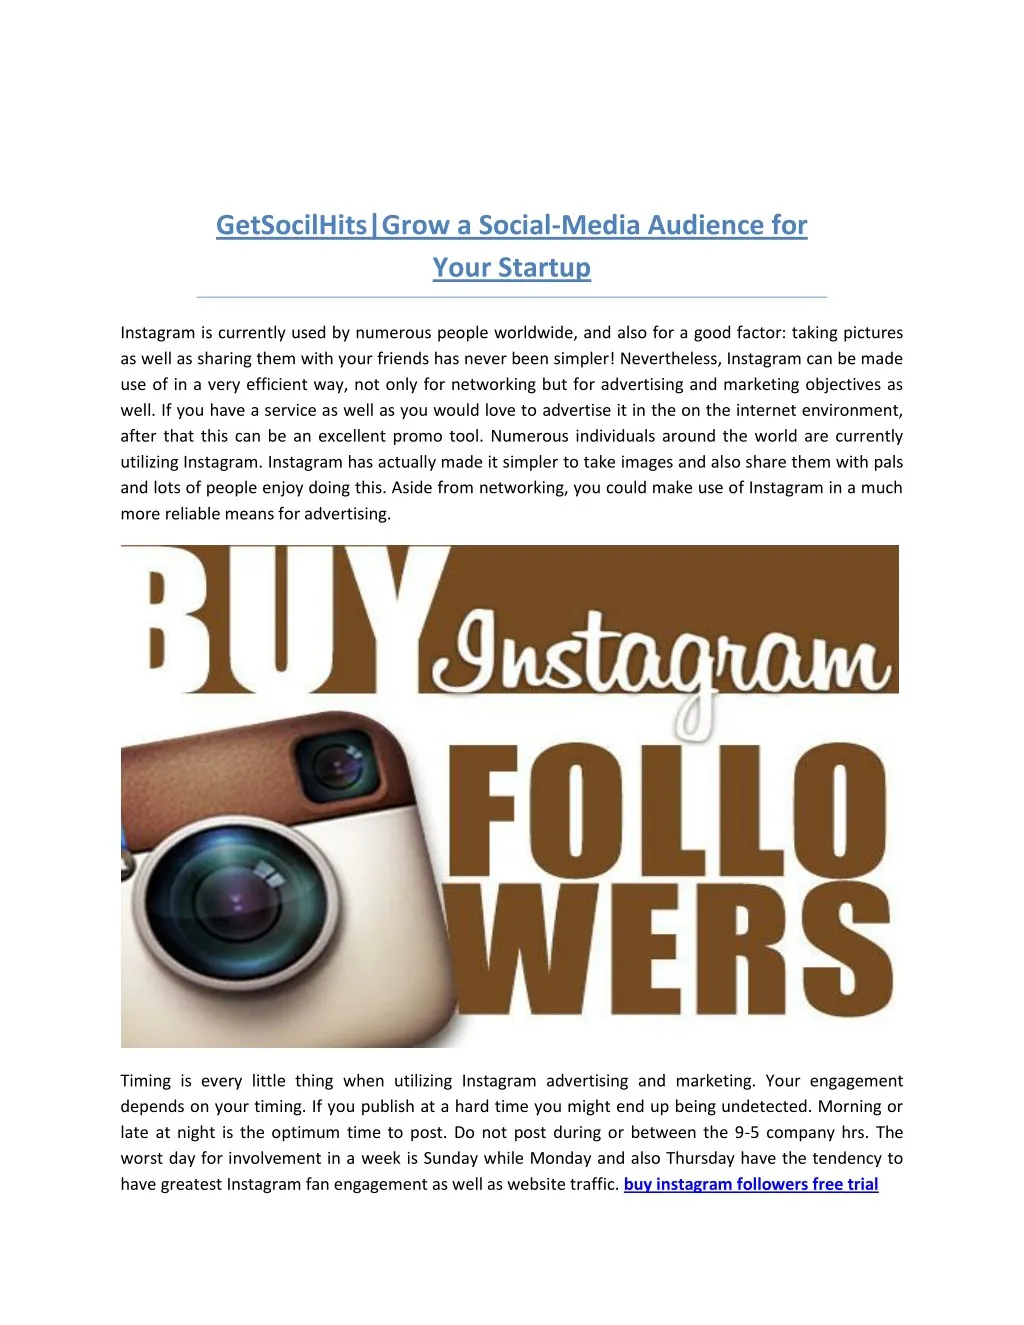 getsocilhits grow a social media audience